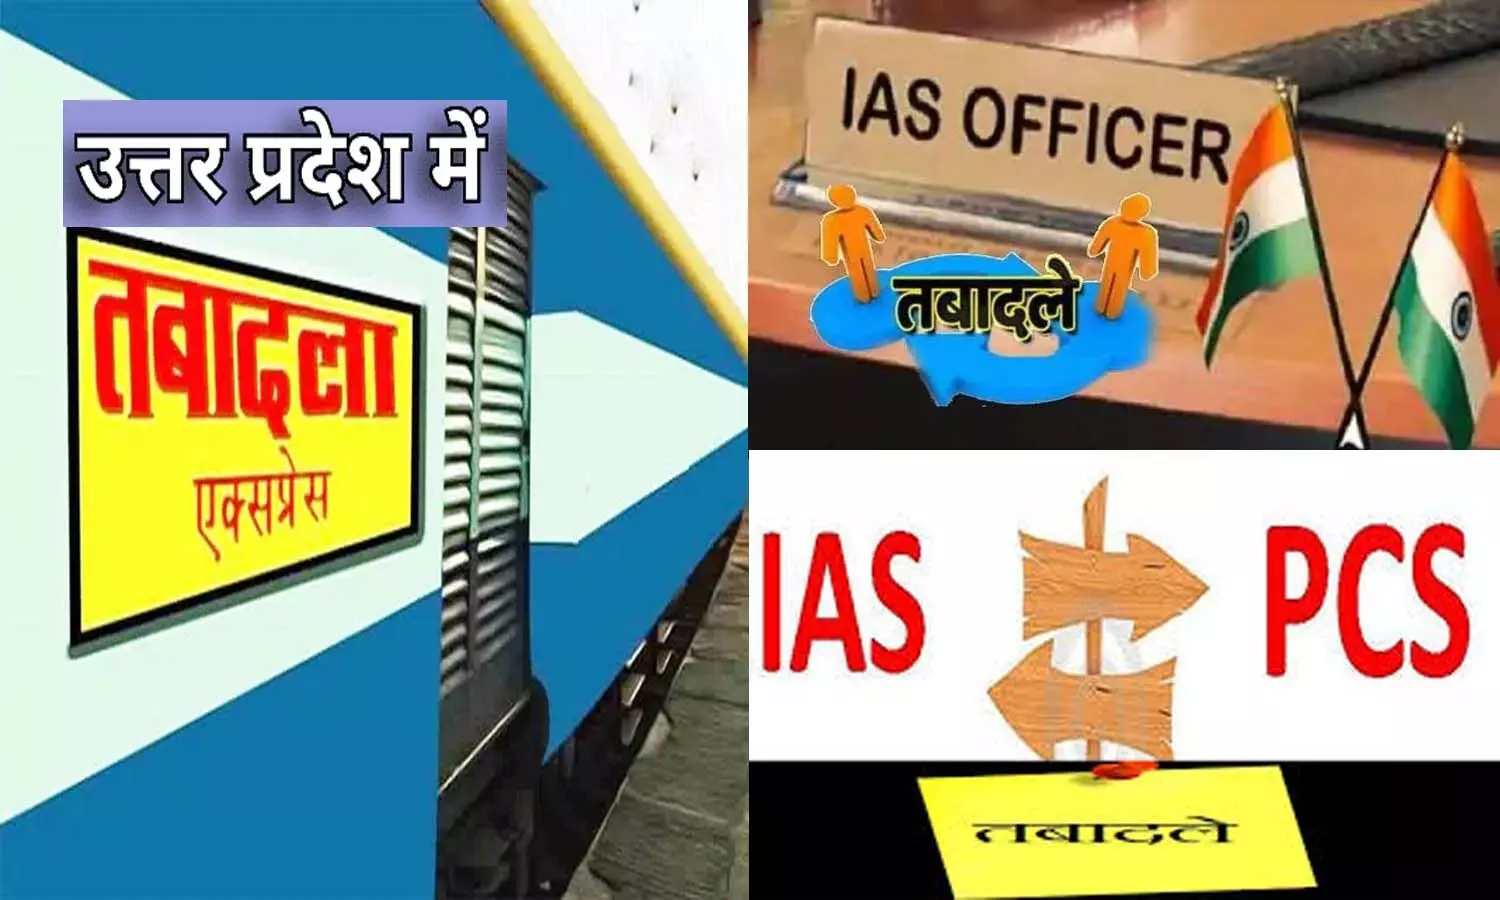 Transfer Express running in UP, 11 IAS, 11 senior PCS officers transferred, see list